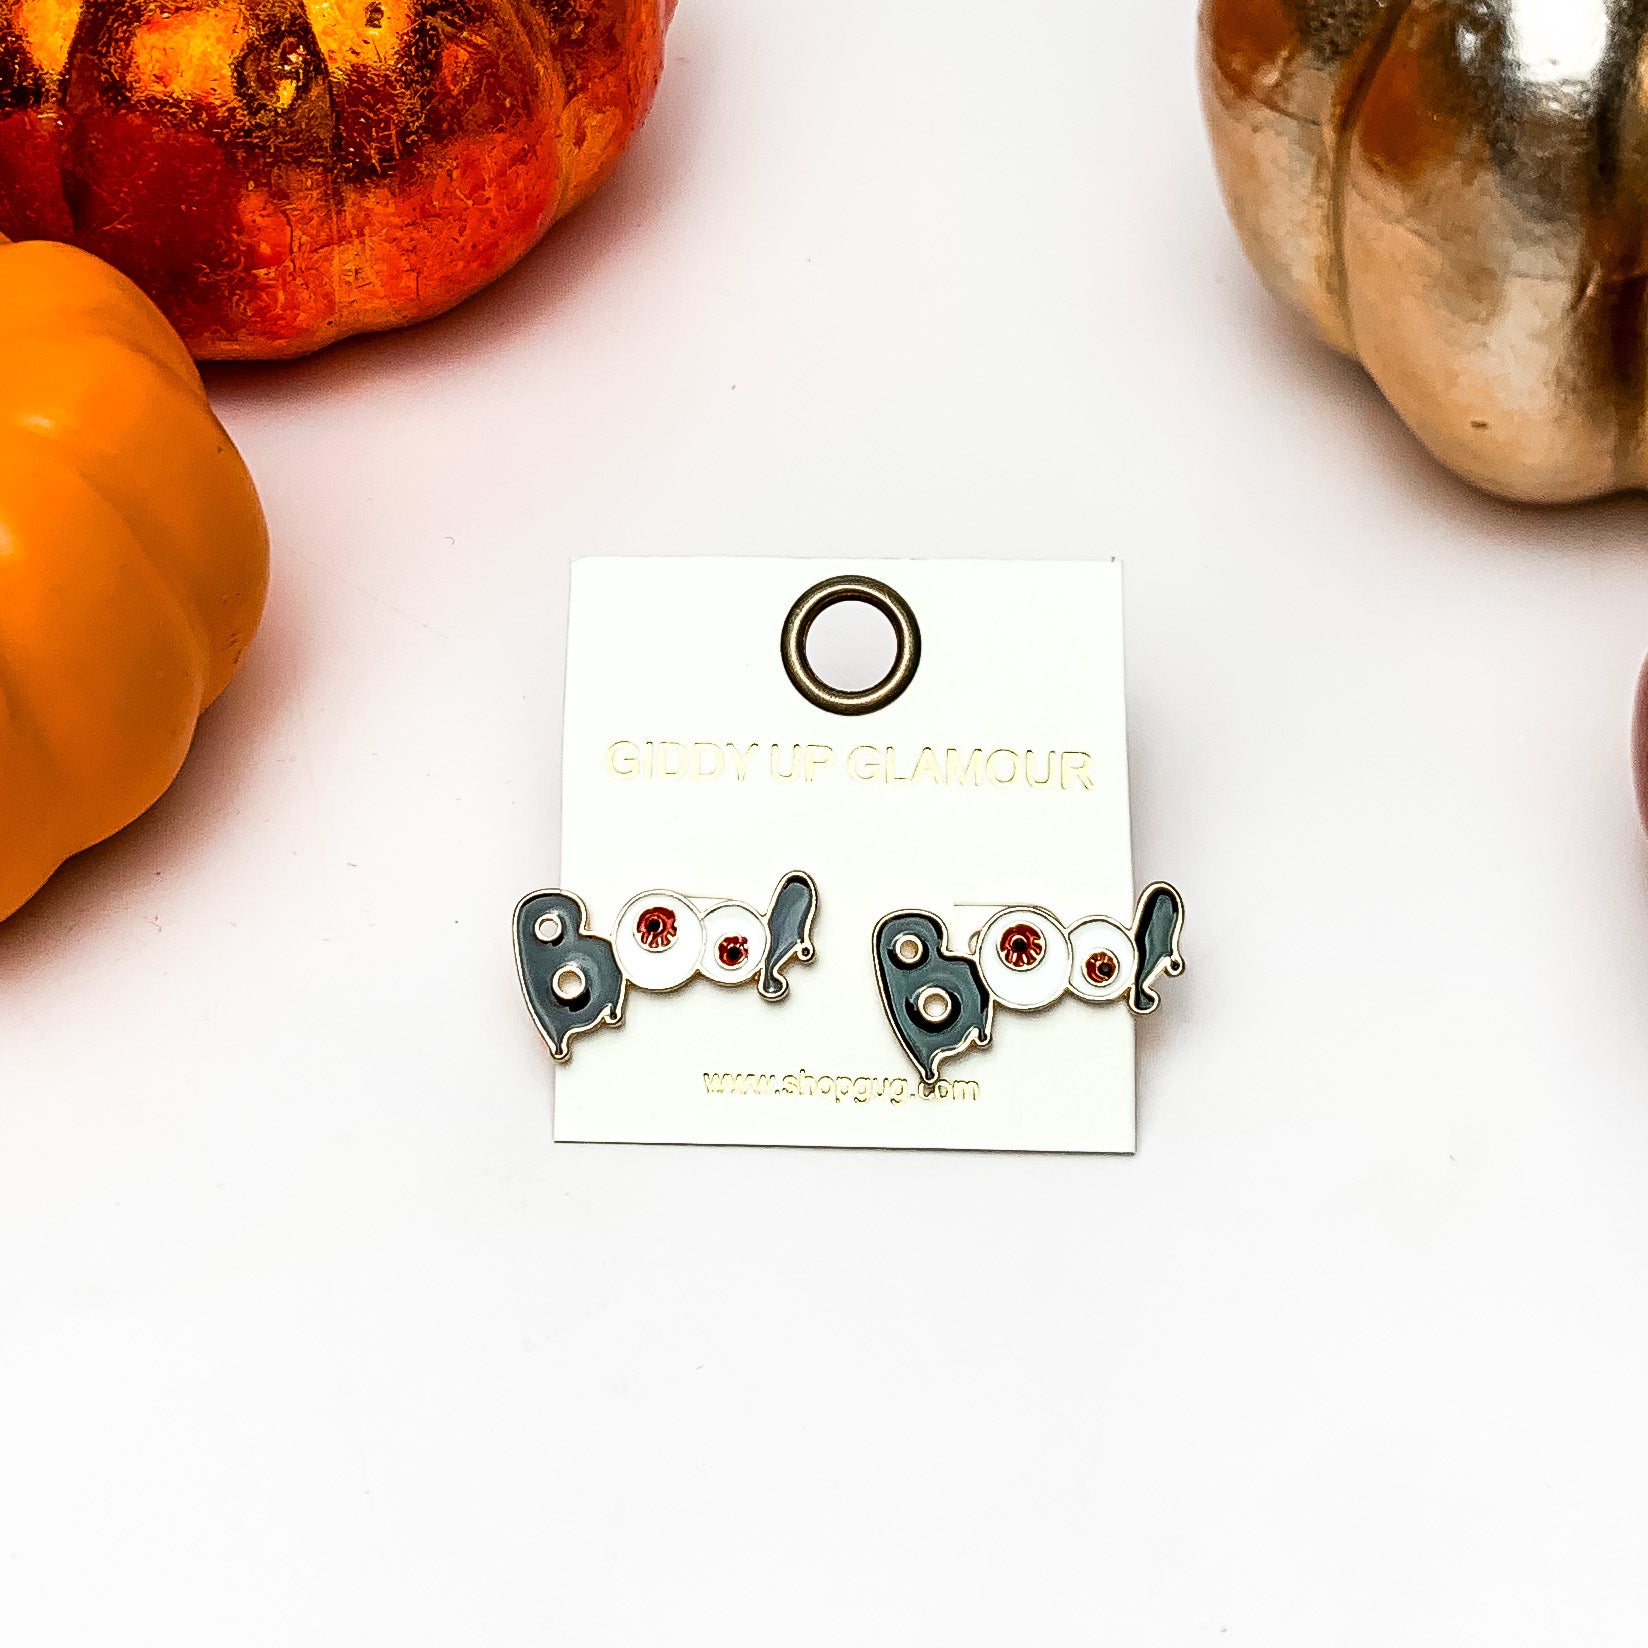 Boo Stud Earrings with Red Eyeballs in Black. These earrings are on a white background with orange and silver pumpkins around them.